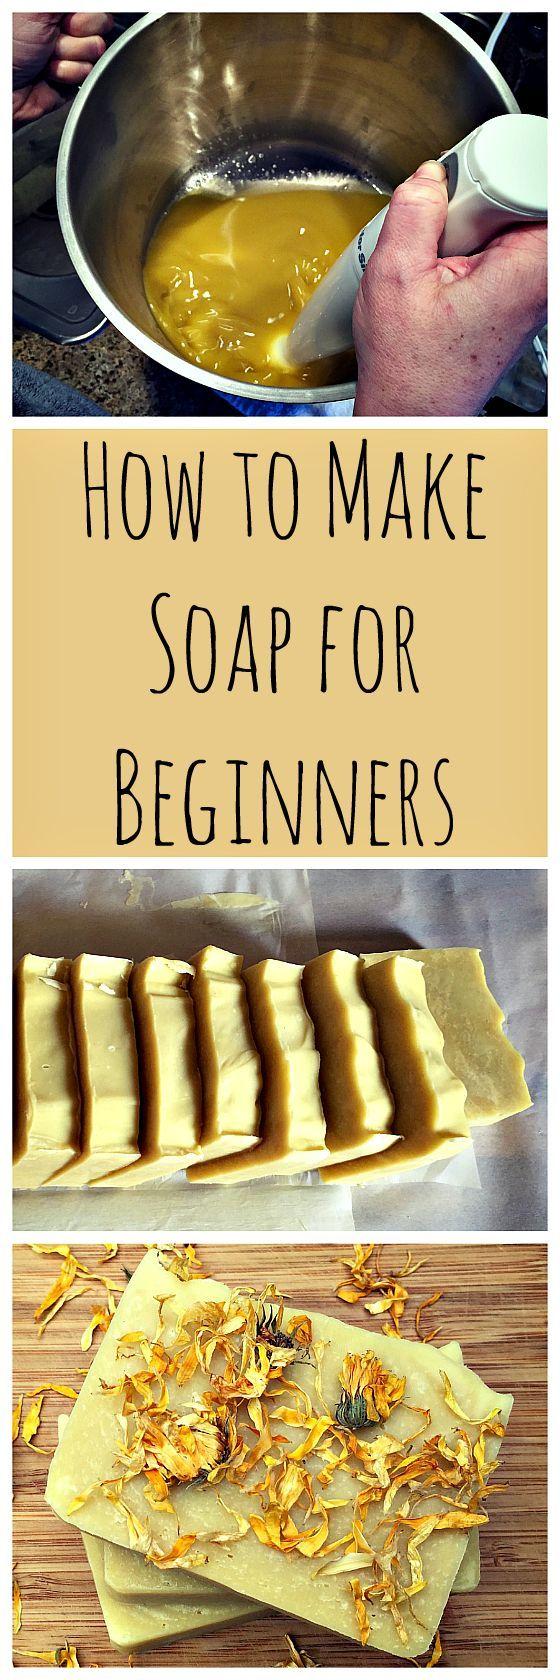 Wedding - How To Make Soap For Beginners